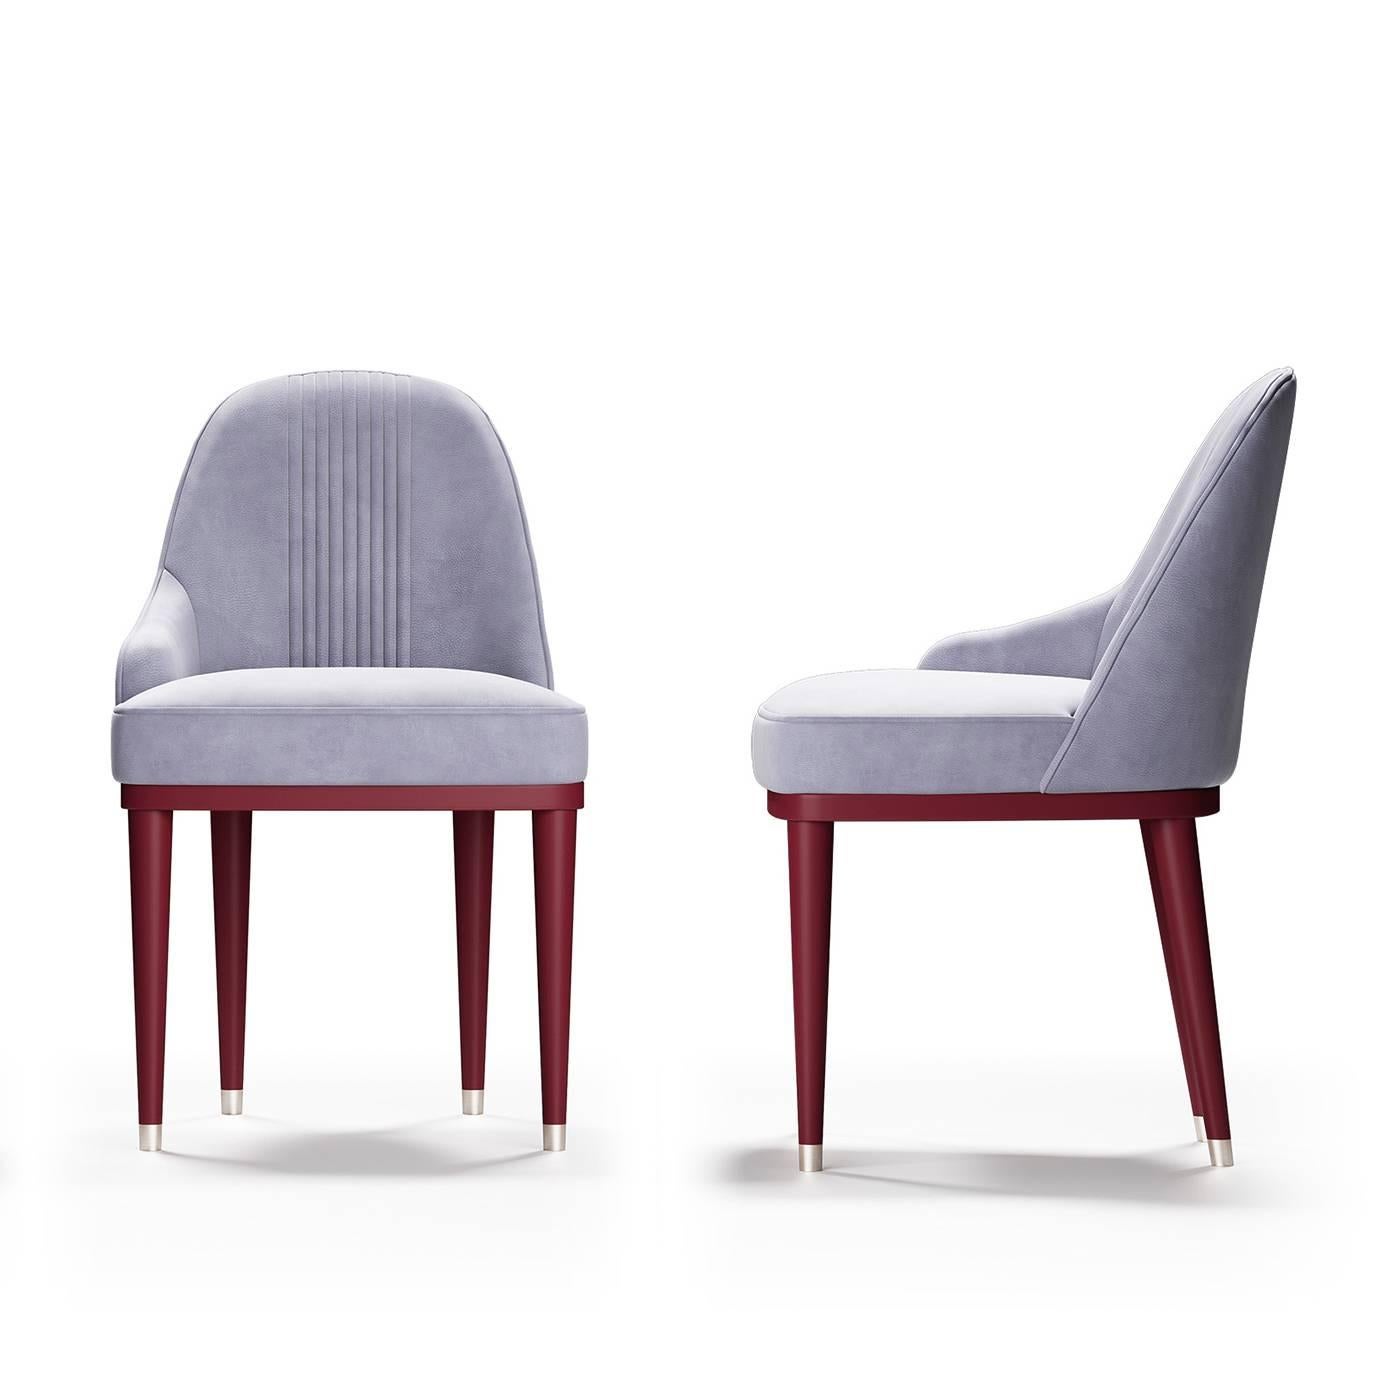 A daring blend of modern aesthetic and expert craftsmanship, this unique dining chair will be a timeless accent in a modern-style home. Reminiscent of innovative Bauhaus furniture, this chair features a round back and just one armrest (please